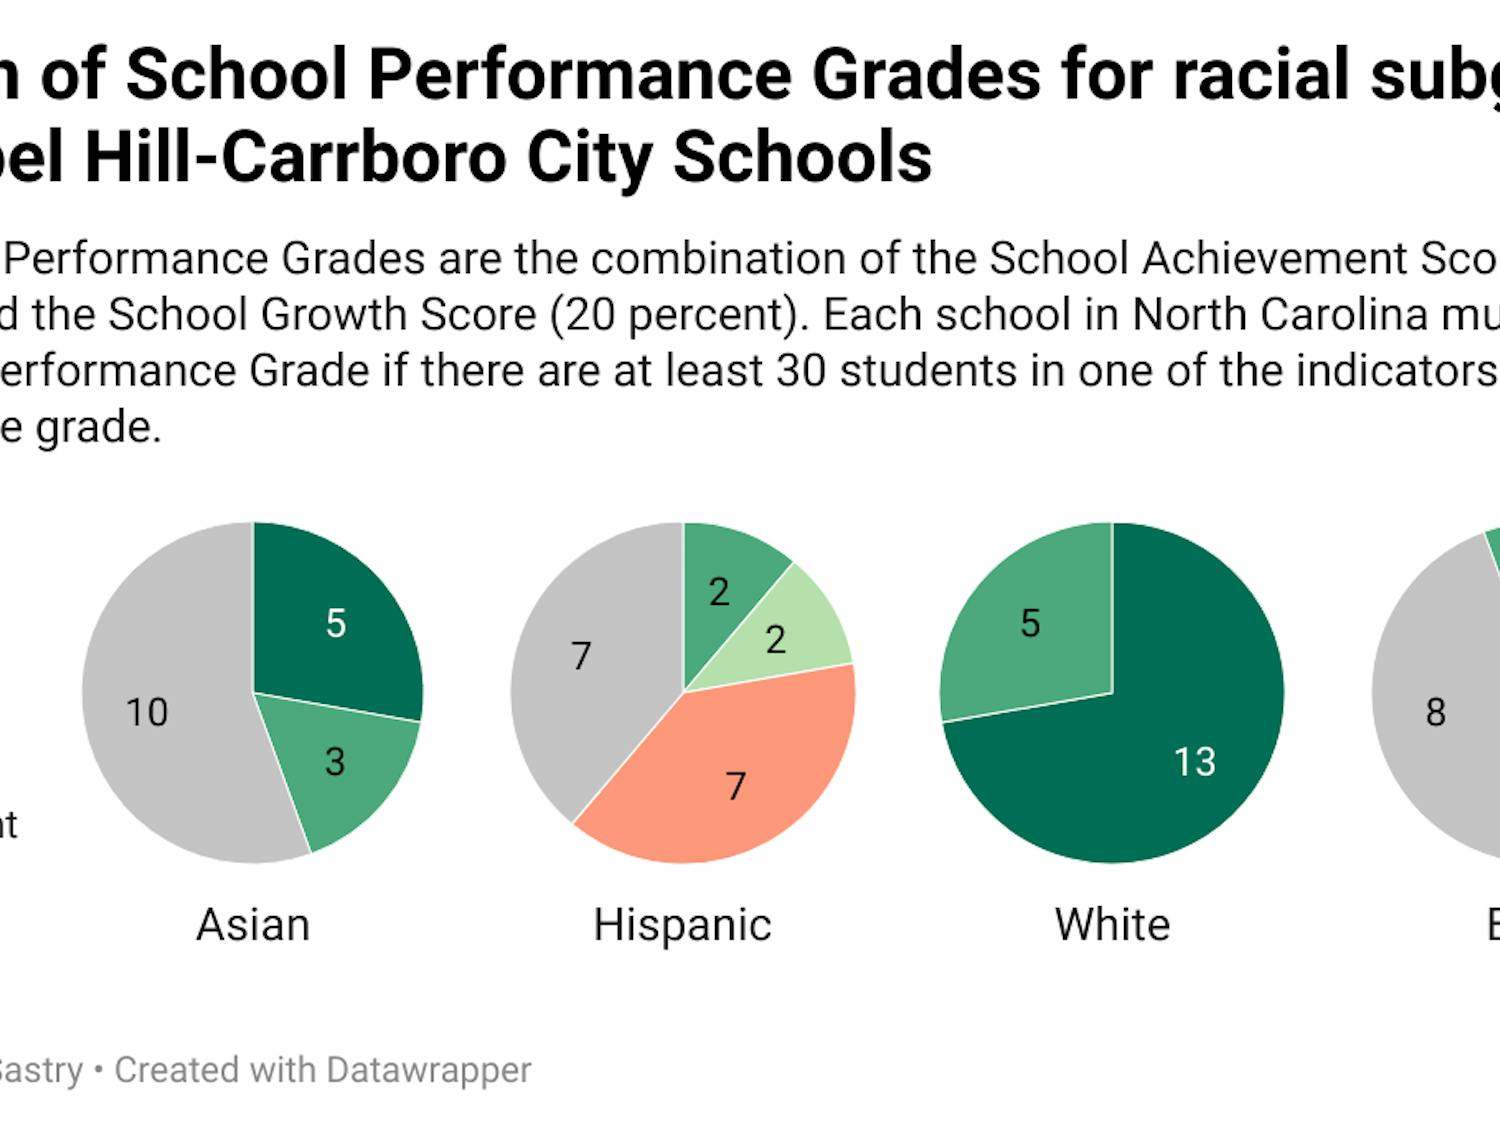 Divison of School Performance Grades for racial subgroups in Chapel Hill-Carrboro City Schools